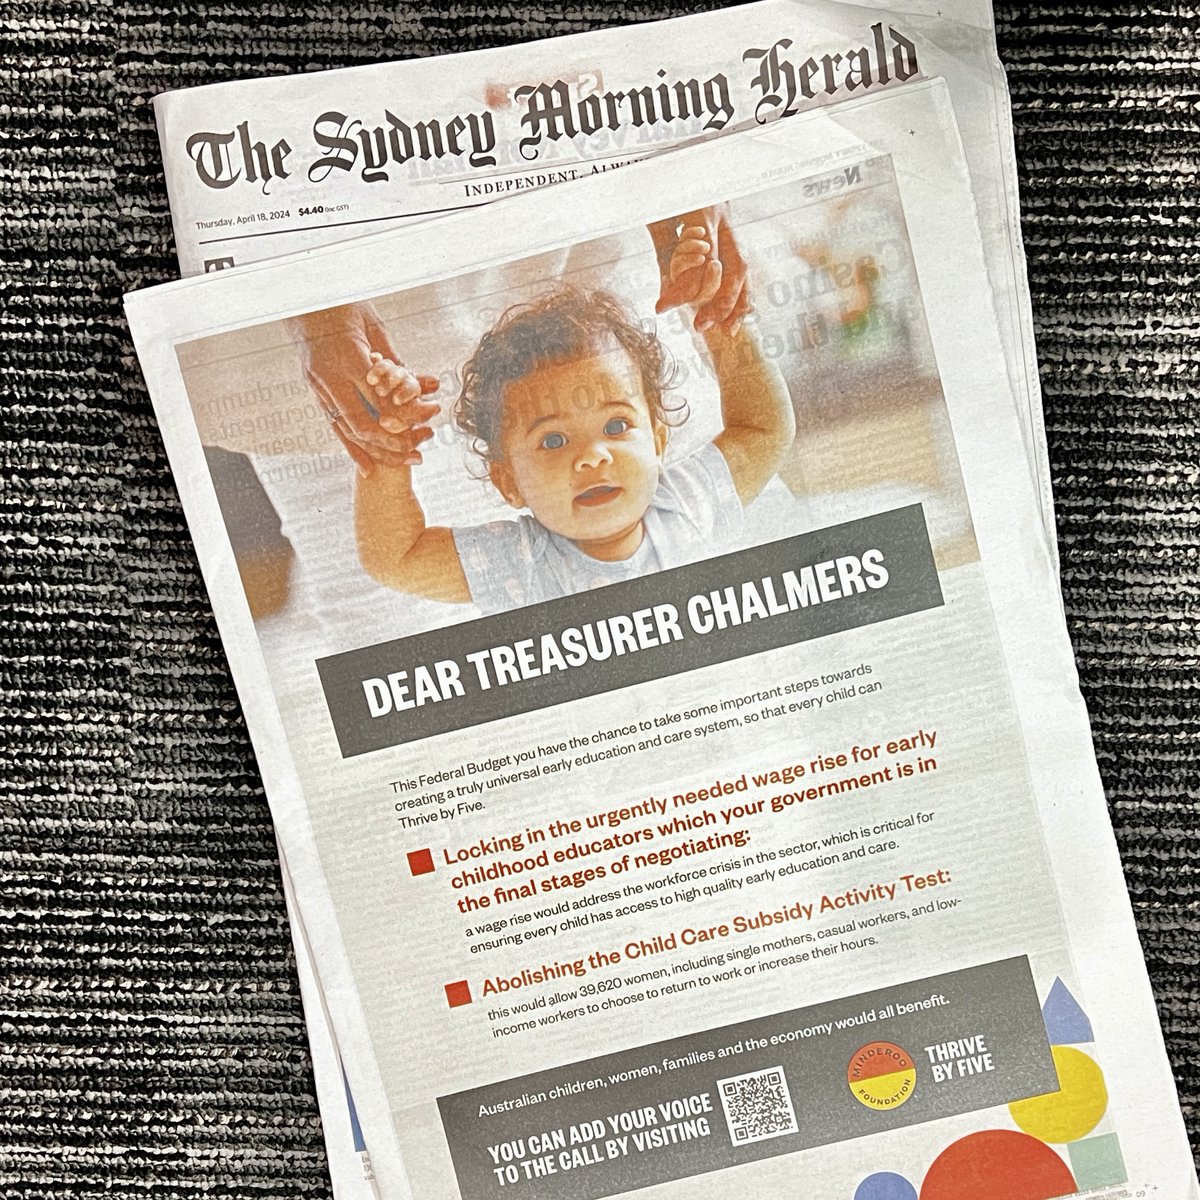 Have you seen today's Sydney Morning Herald? 

@thrivebyfivecampaign has a full-page ad calling on Treasurer Jim Chalmers to fund wage rises in the upcoming budget to address the staffing crisis in the early childhood education and care sector.

#auspol #ozearlyed